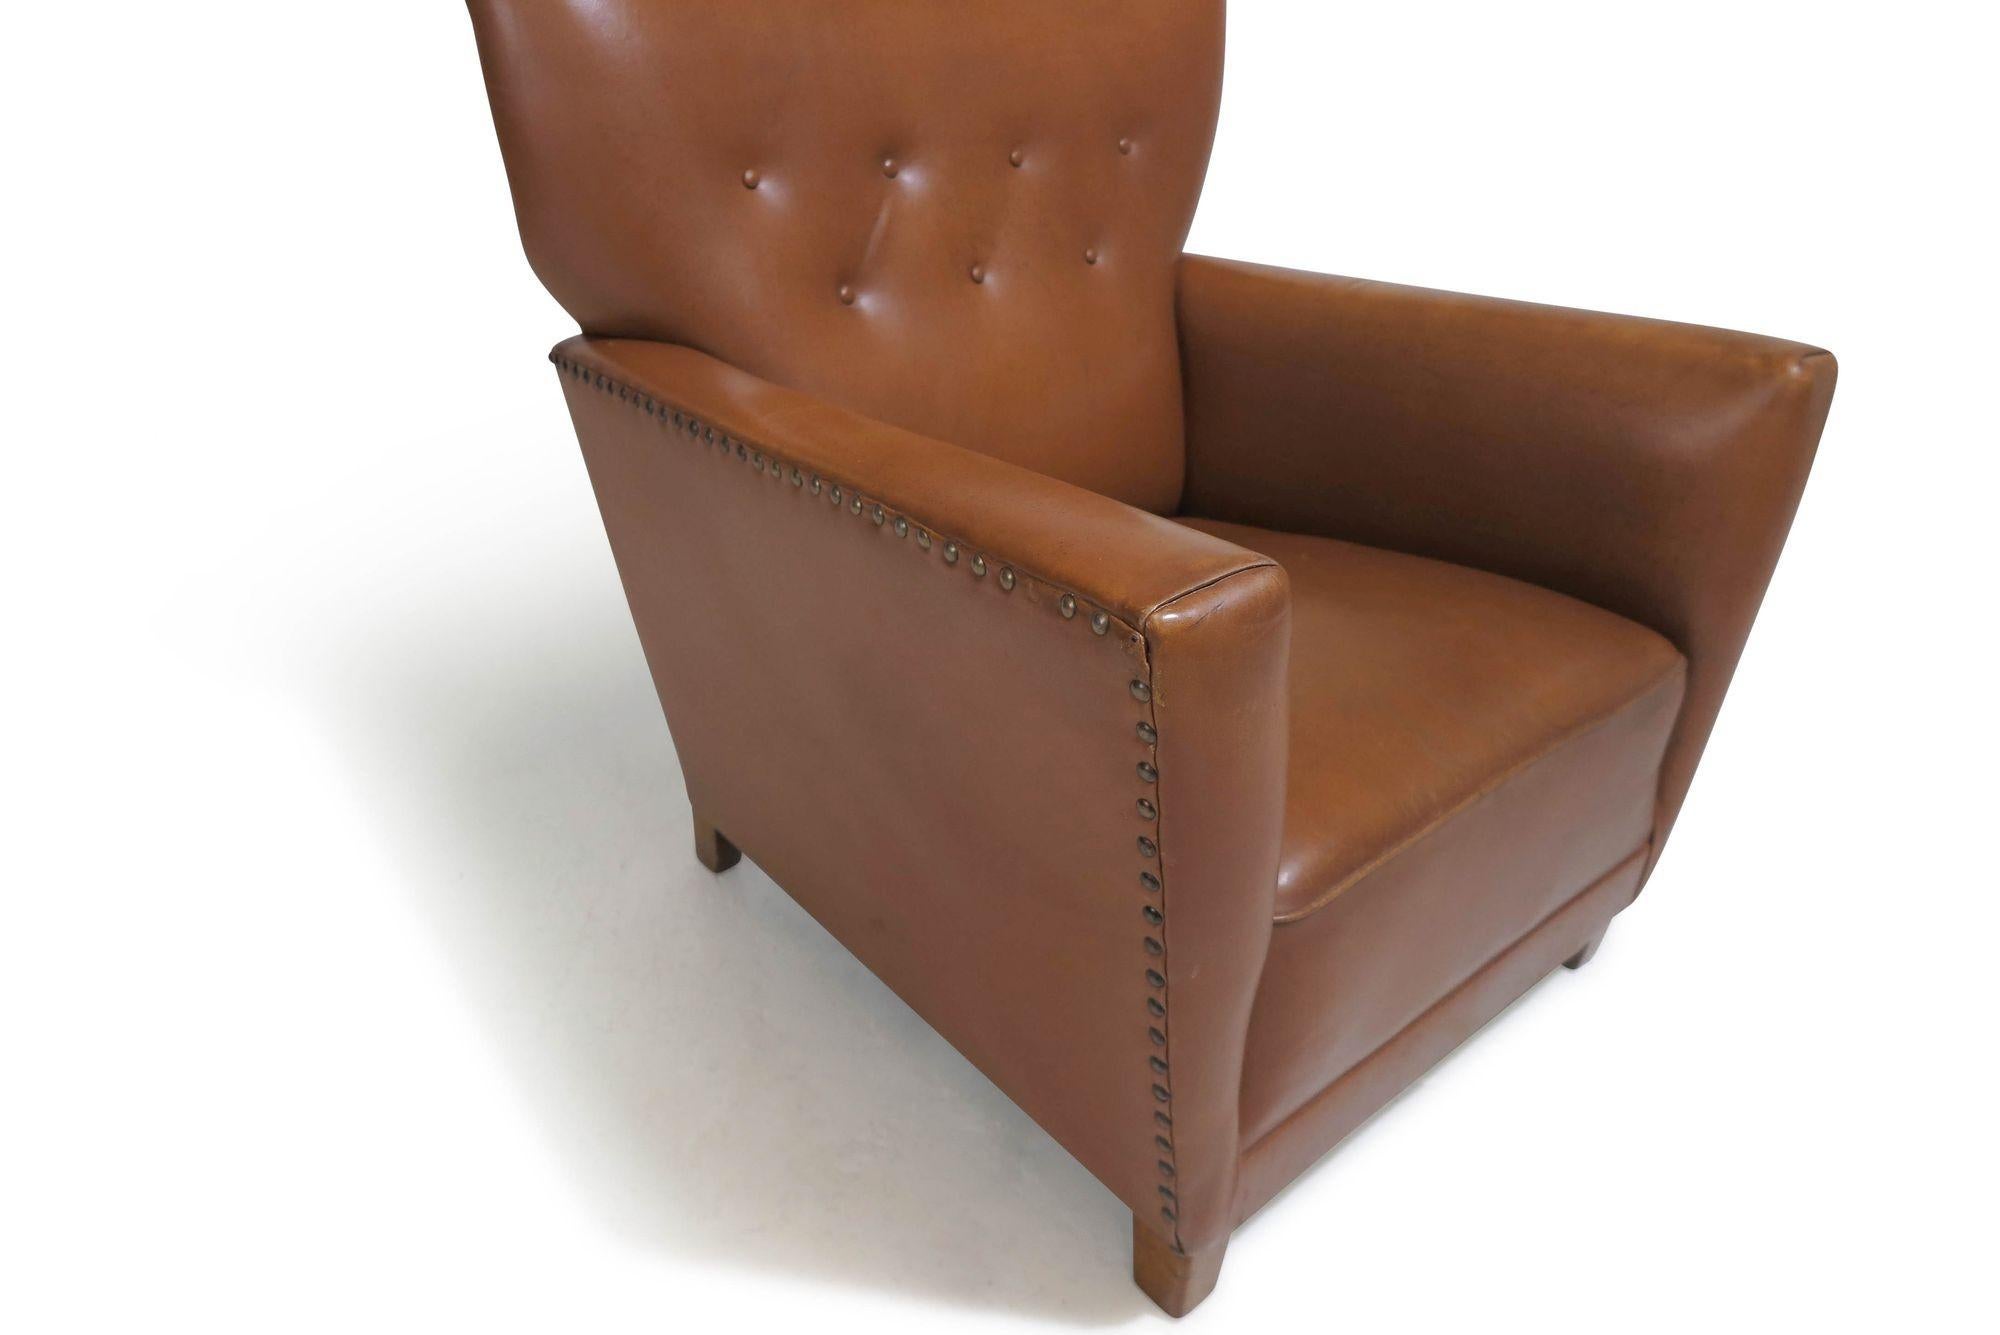 Early 1940's Danish lounge chair upholstered in the original brown leather with button tufted back, raised on stained walnut legs. Eight-way hand-tied copper springs under seat, horsehair padding, can be used as found or be completely reupholstered